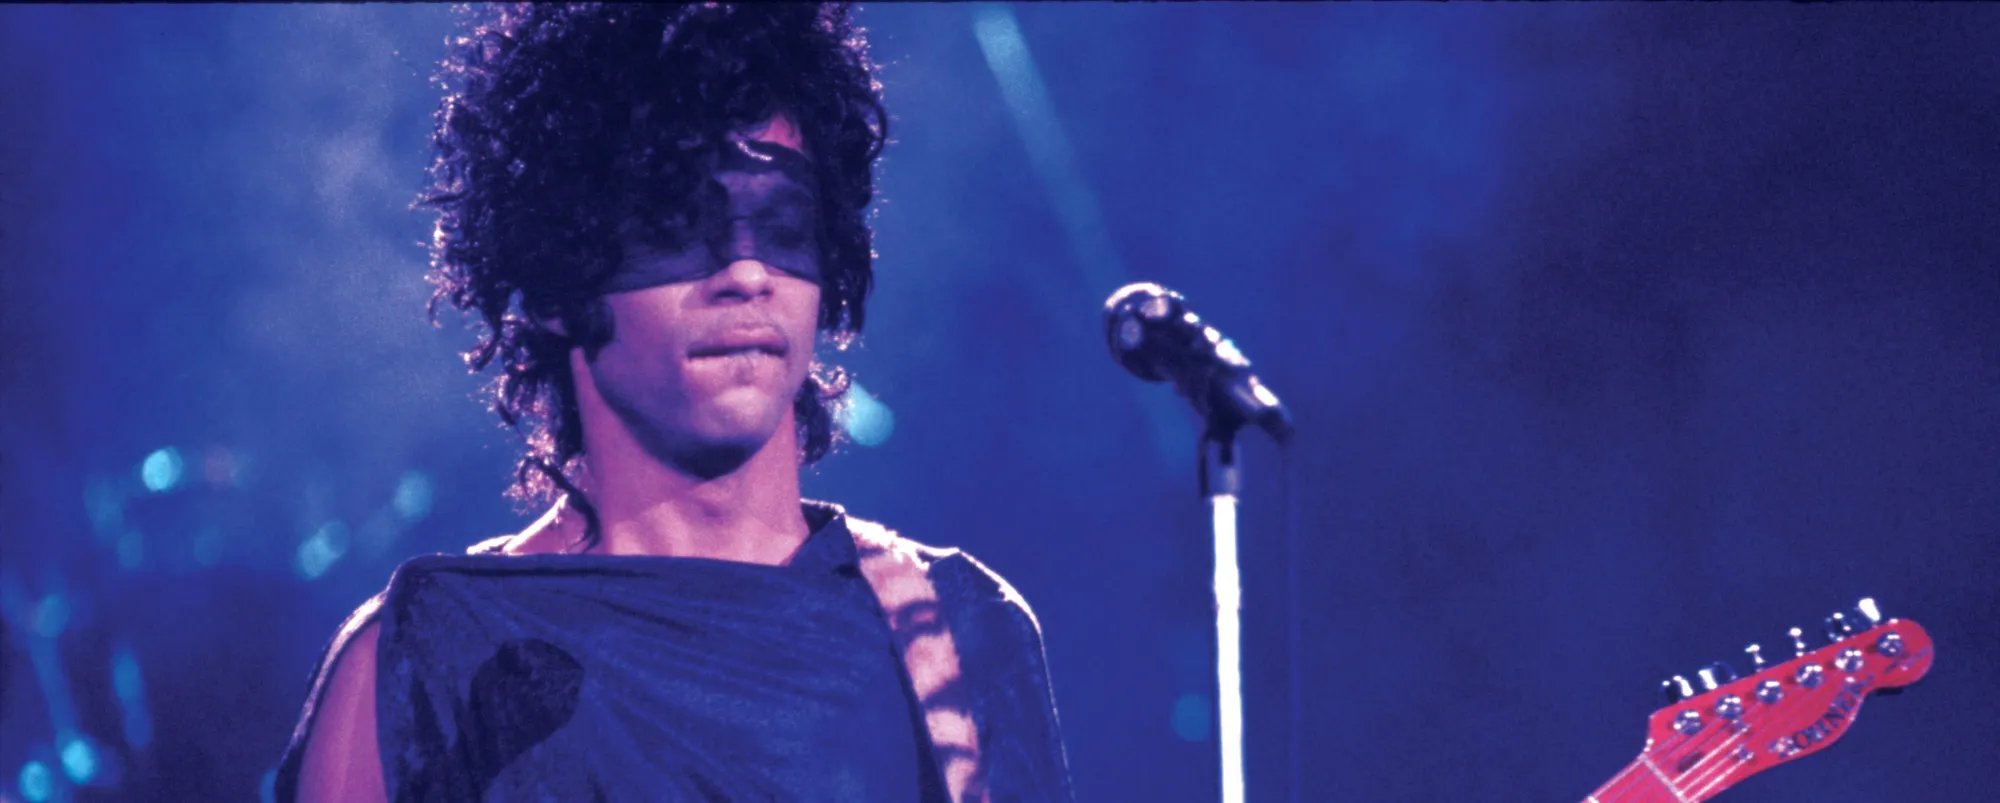 Prince’s Iconic 1985 Syracuse Concert to Be Rereleased with Enhanced Footage